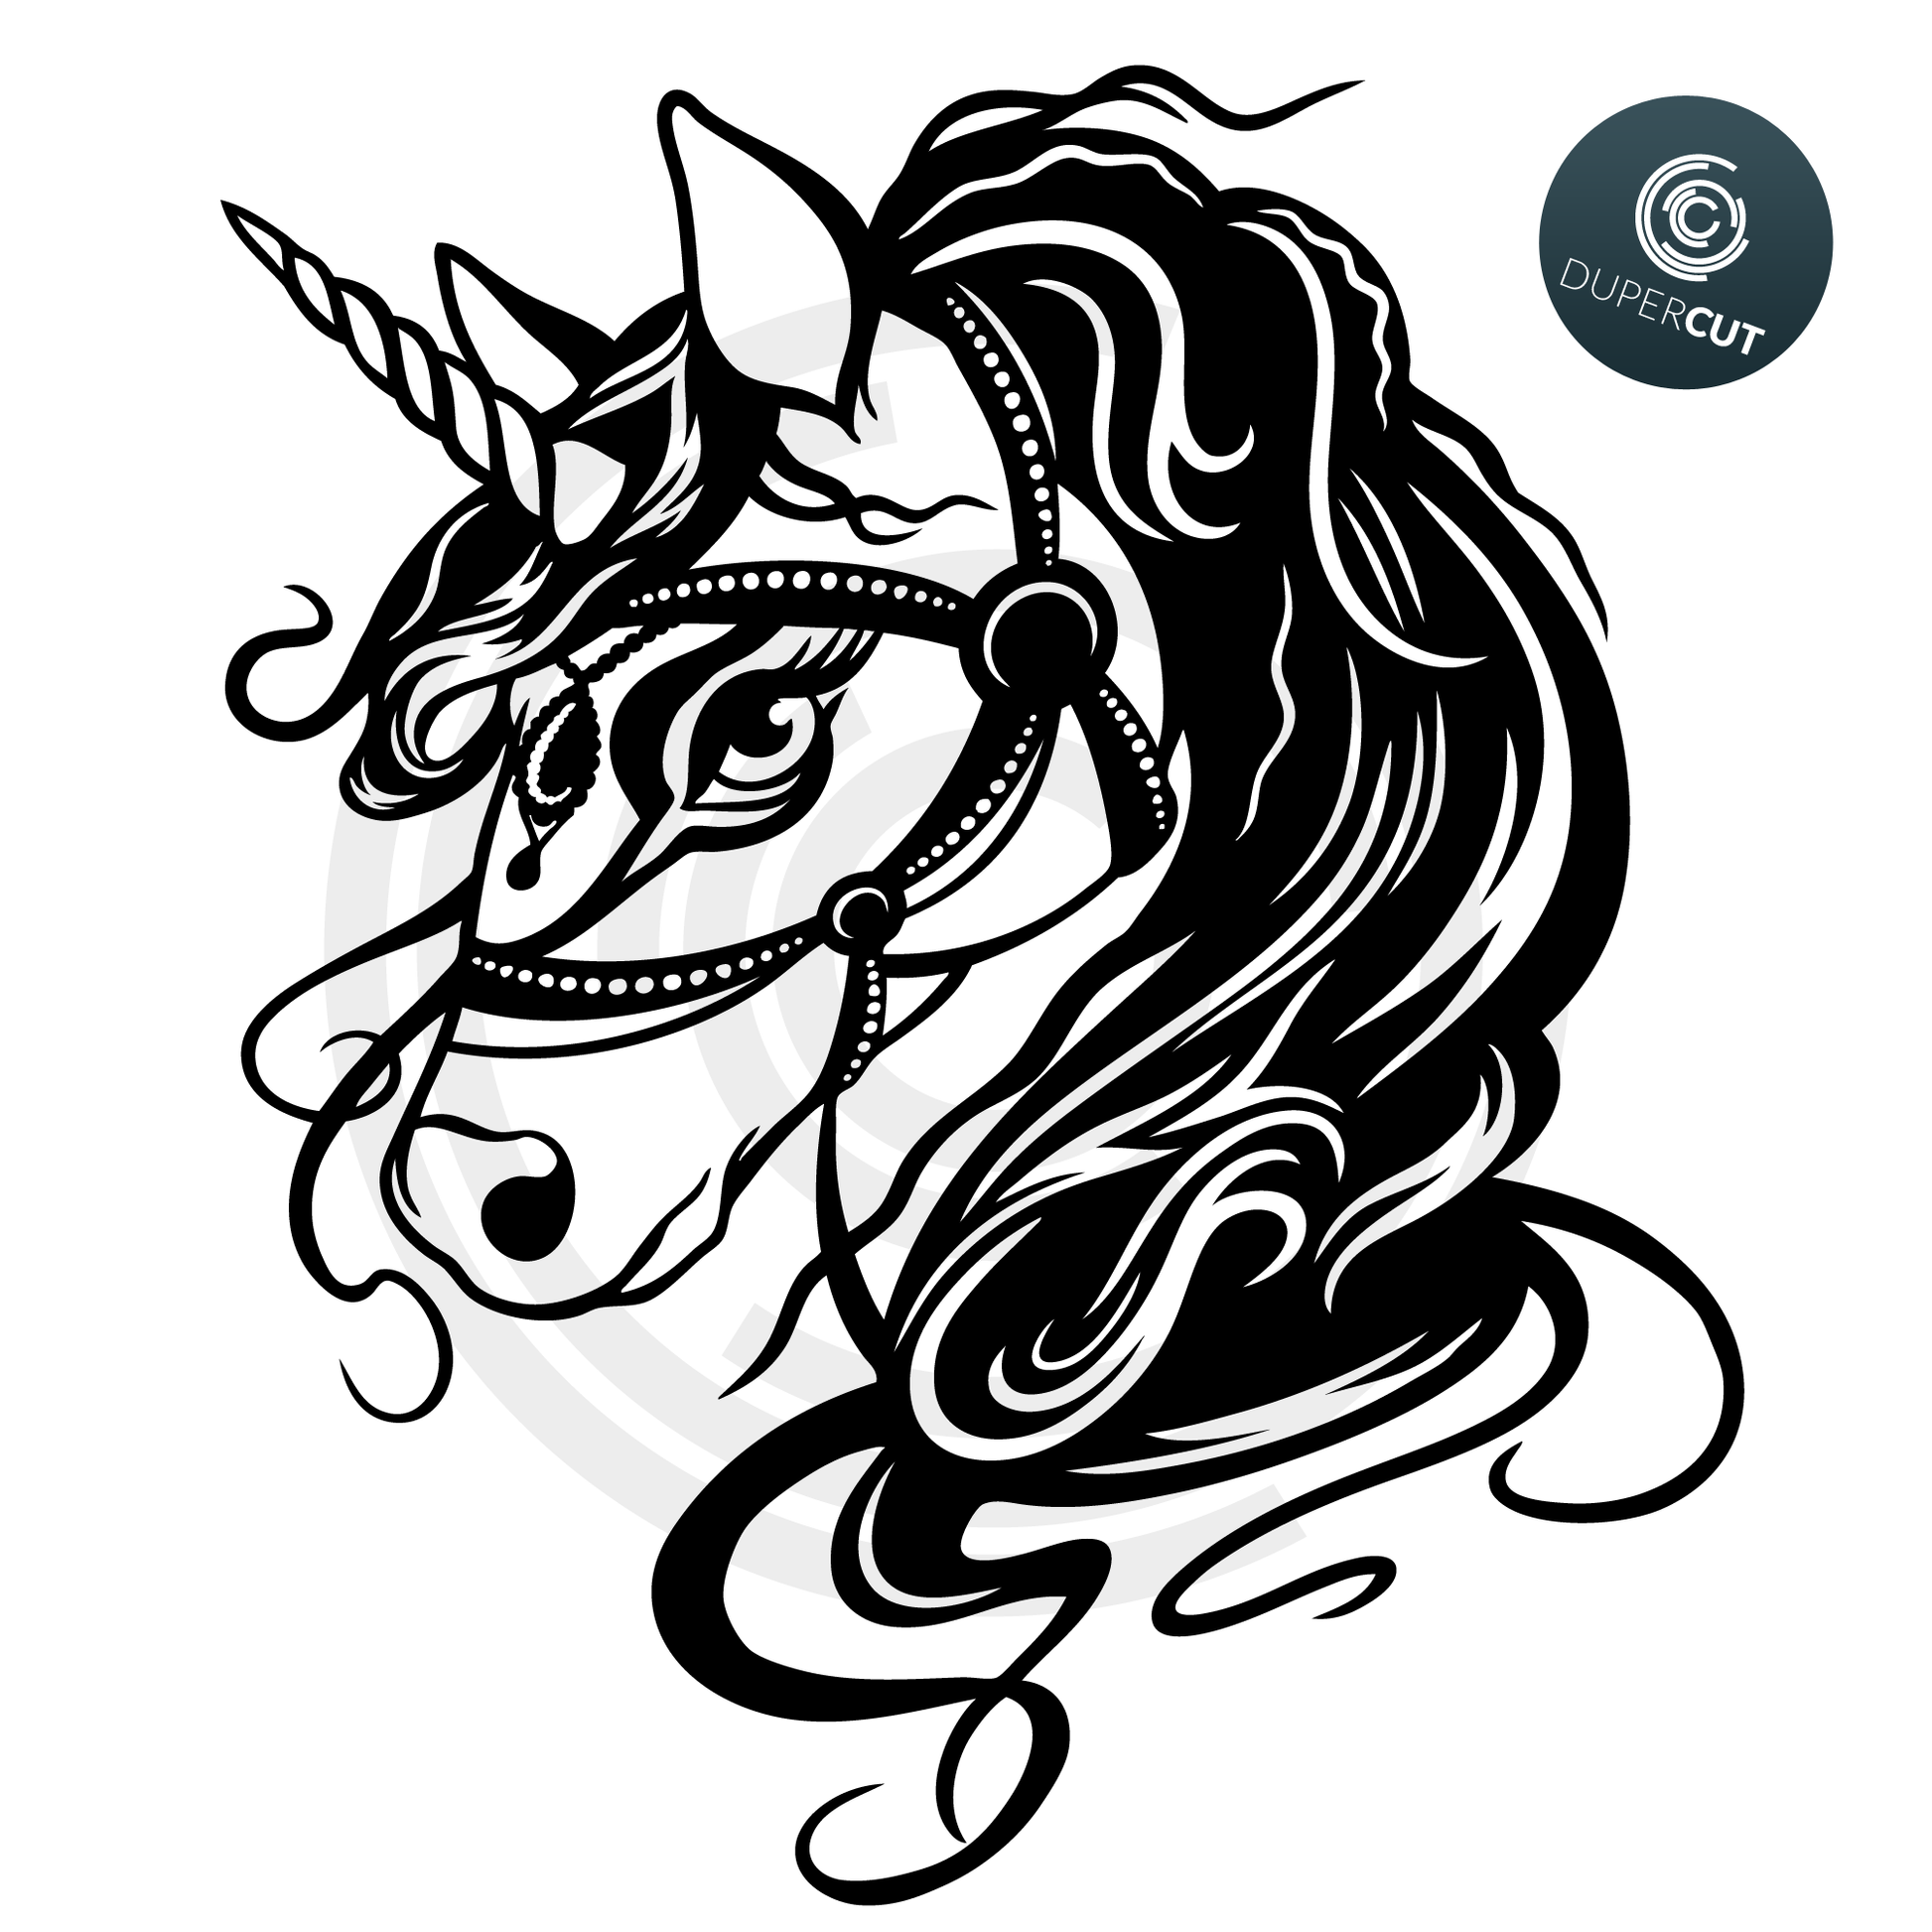 SVG PNG DXF Unicorn printable - paper cutting template, print on demand files, for Cricut, Grlowforge, Silhouette